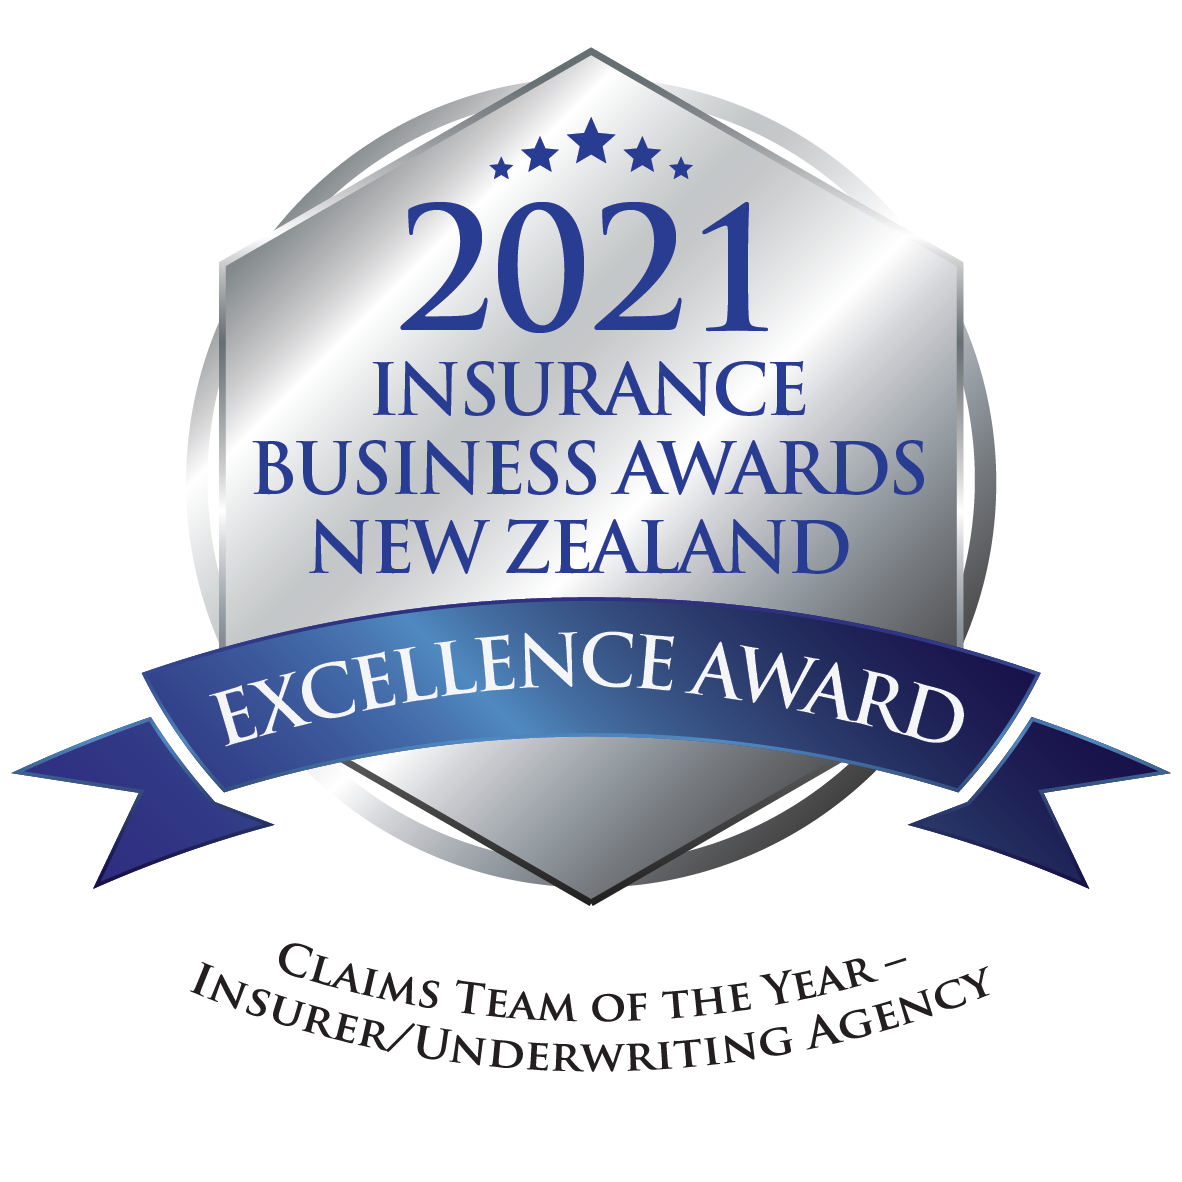 IBANZ - Silver EA Medal Claims Team of the Year ΓÇô Insurer-Underwriting Agency